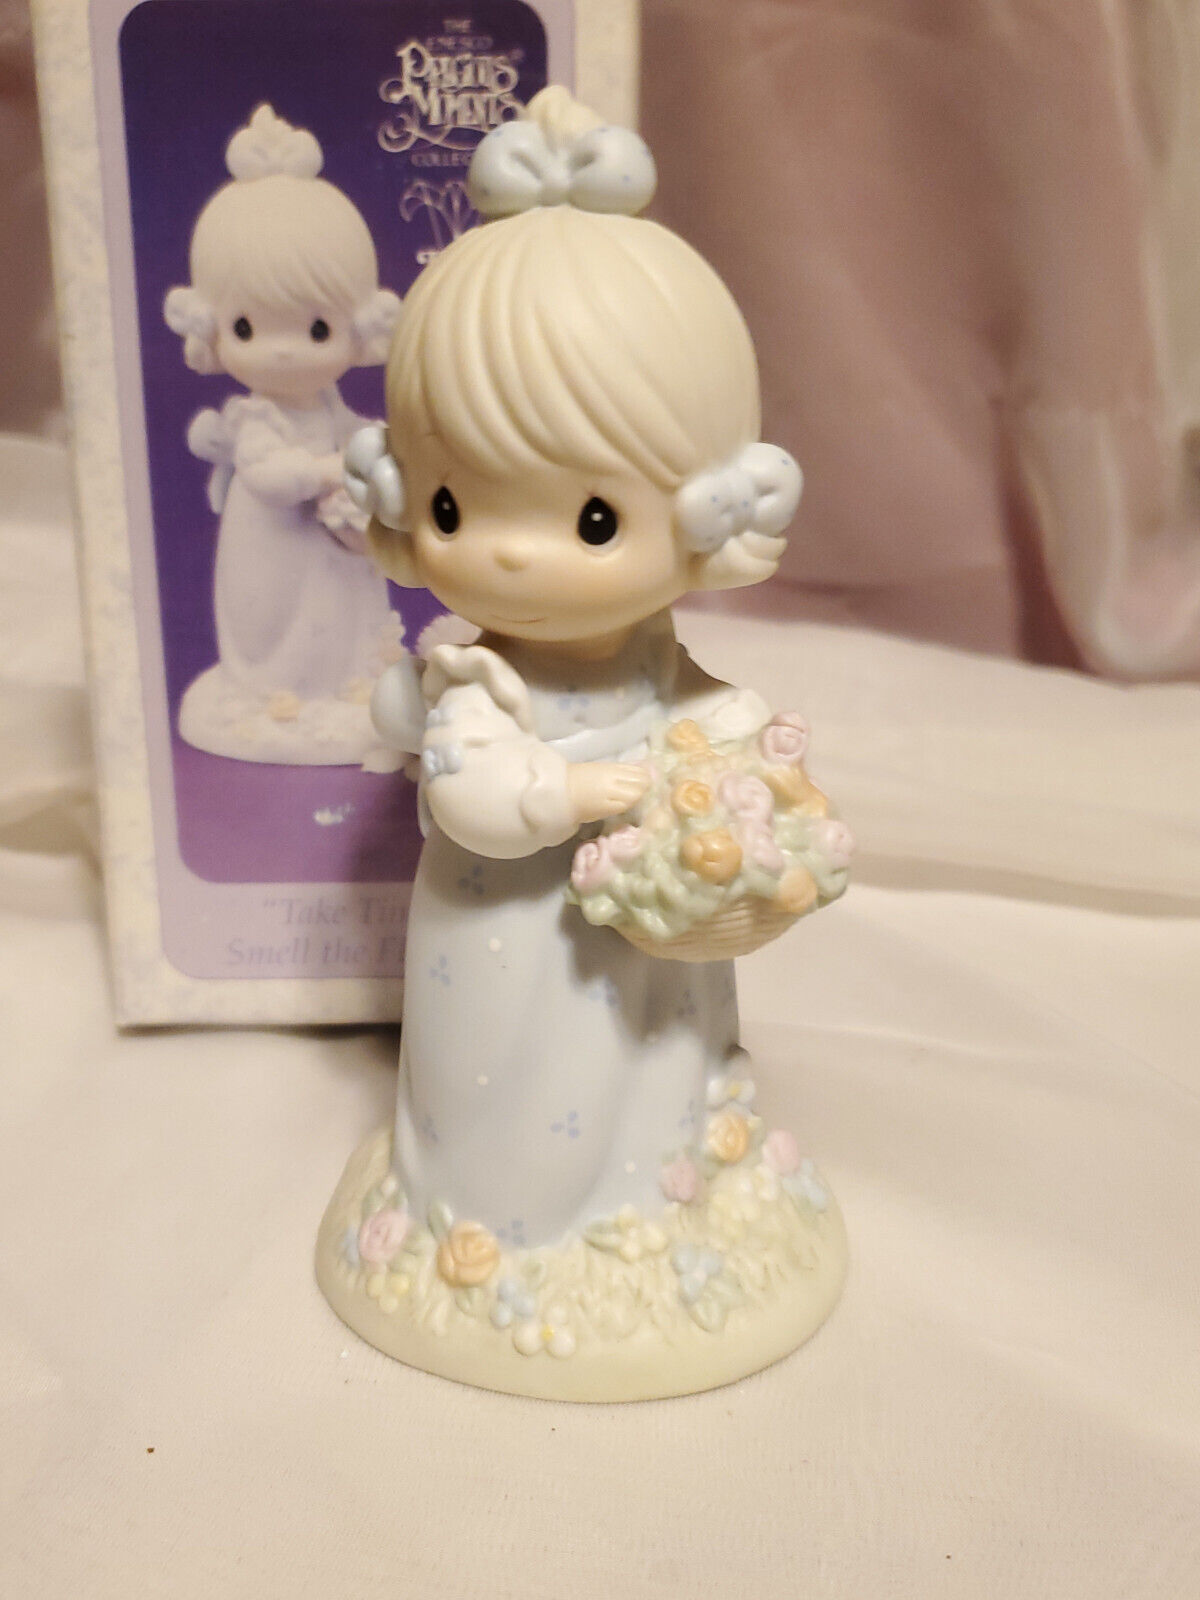 Precious Moments Figurine Take Time To Smell The Flowers 524387 w/ Box VTG 1994